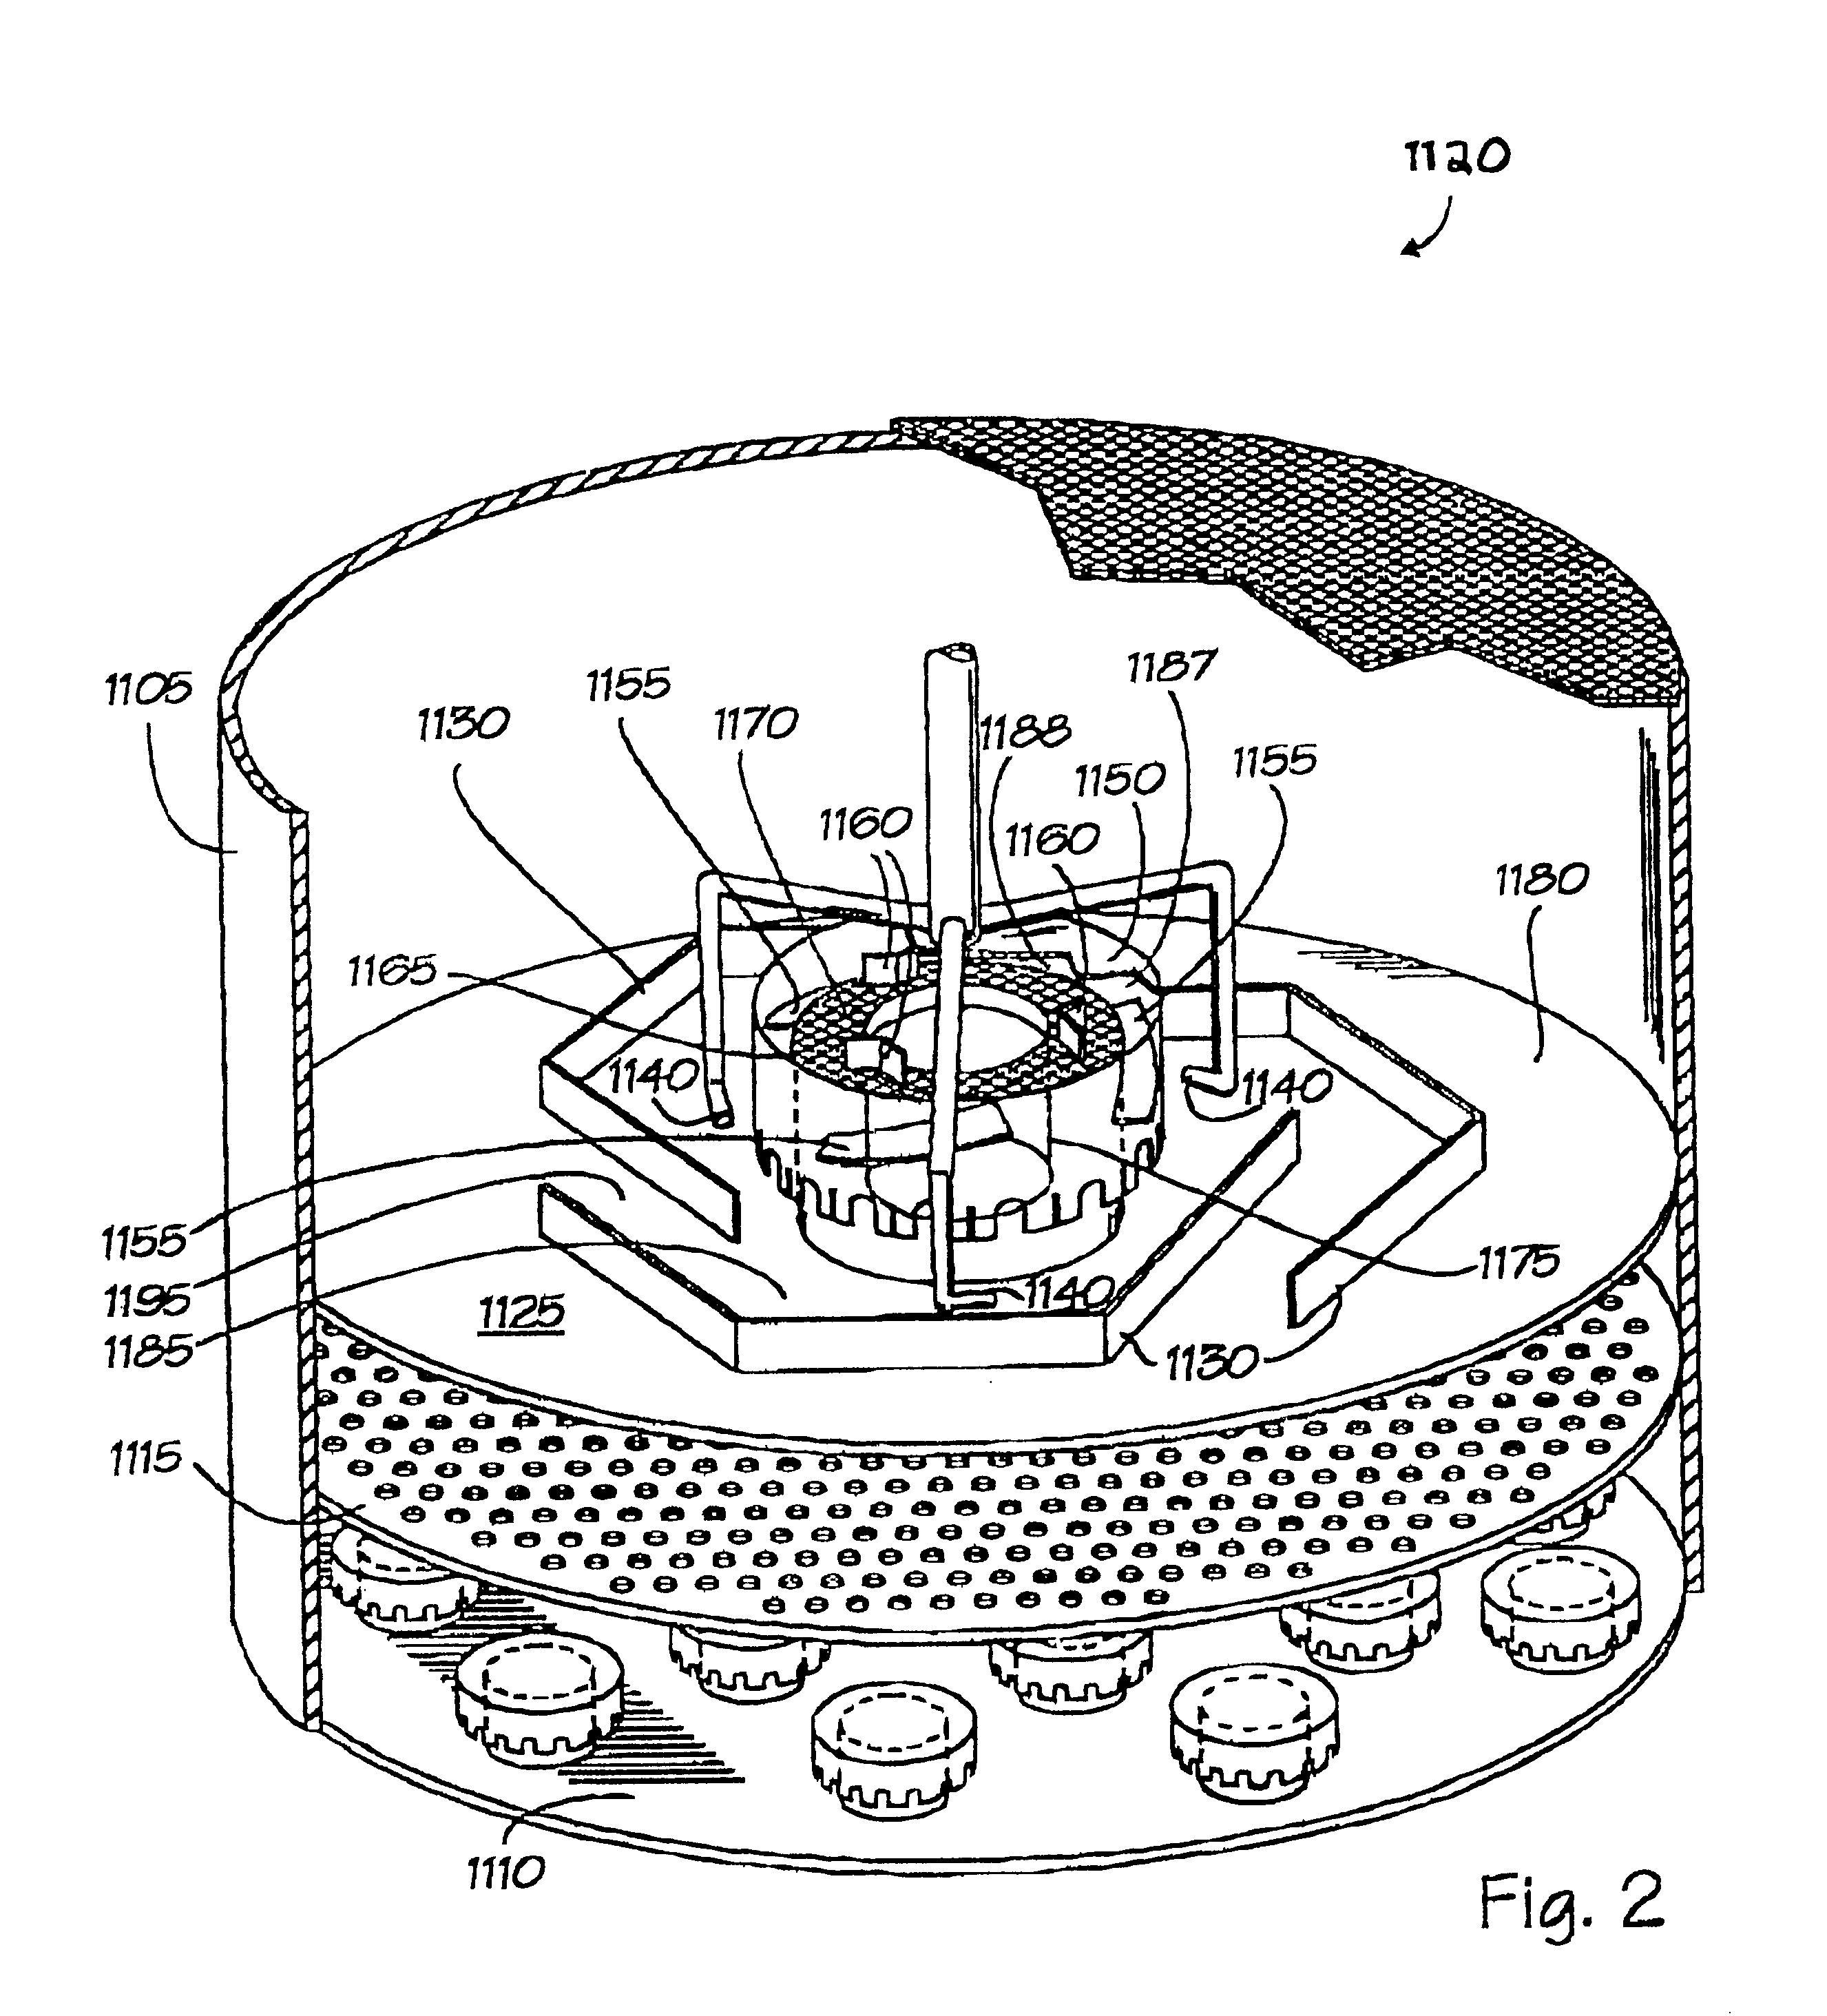 Fluid distributor assembly for a multi-bed, downflow catalytic reactor